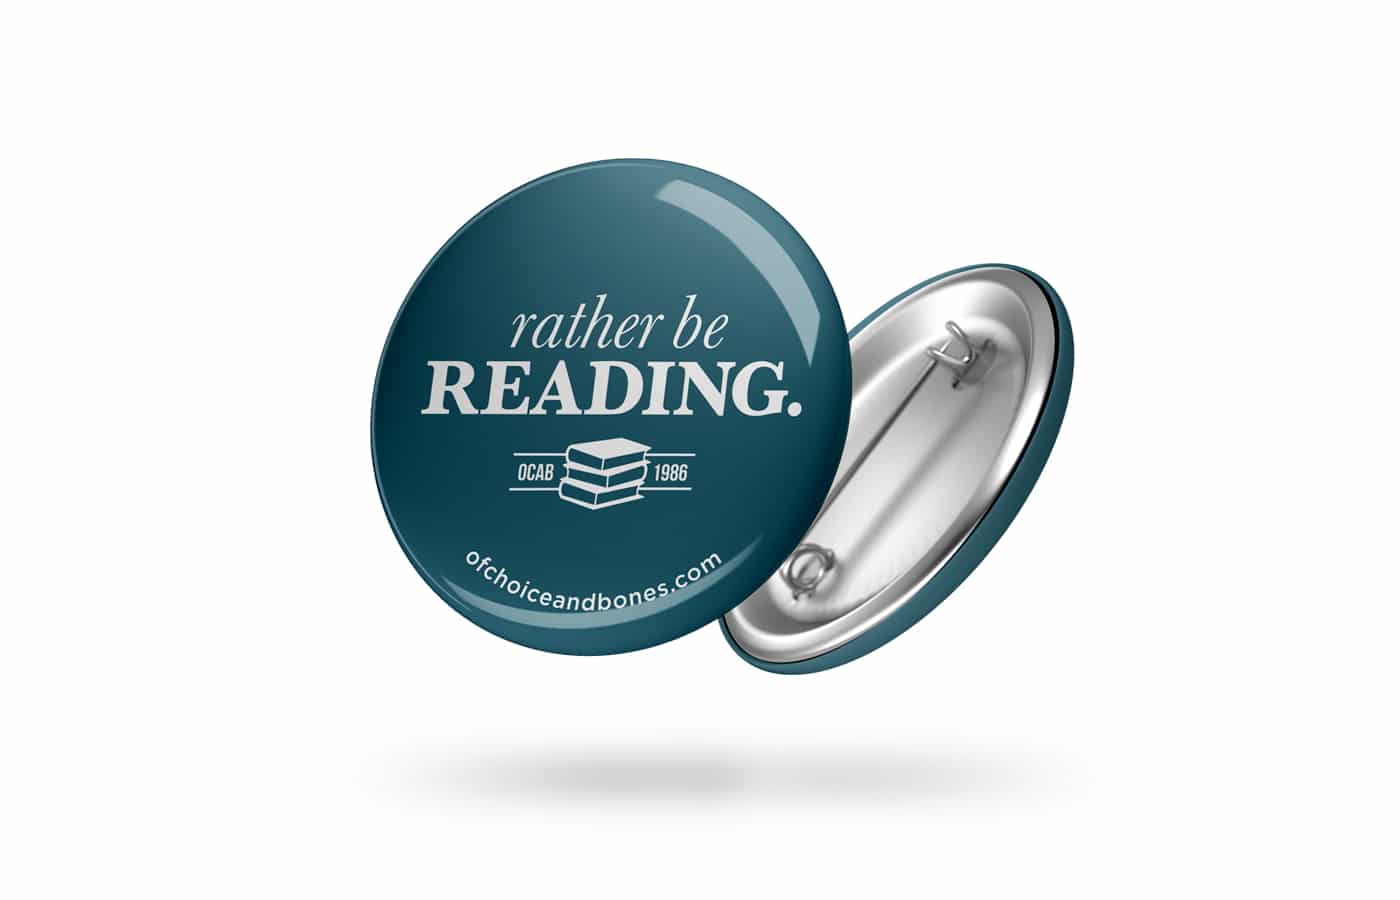 Of Choice & Bones "Rather be Reading" Pin | Enormous Elephant